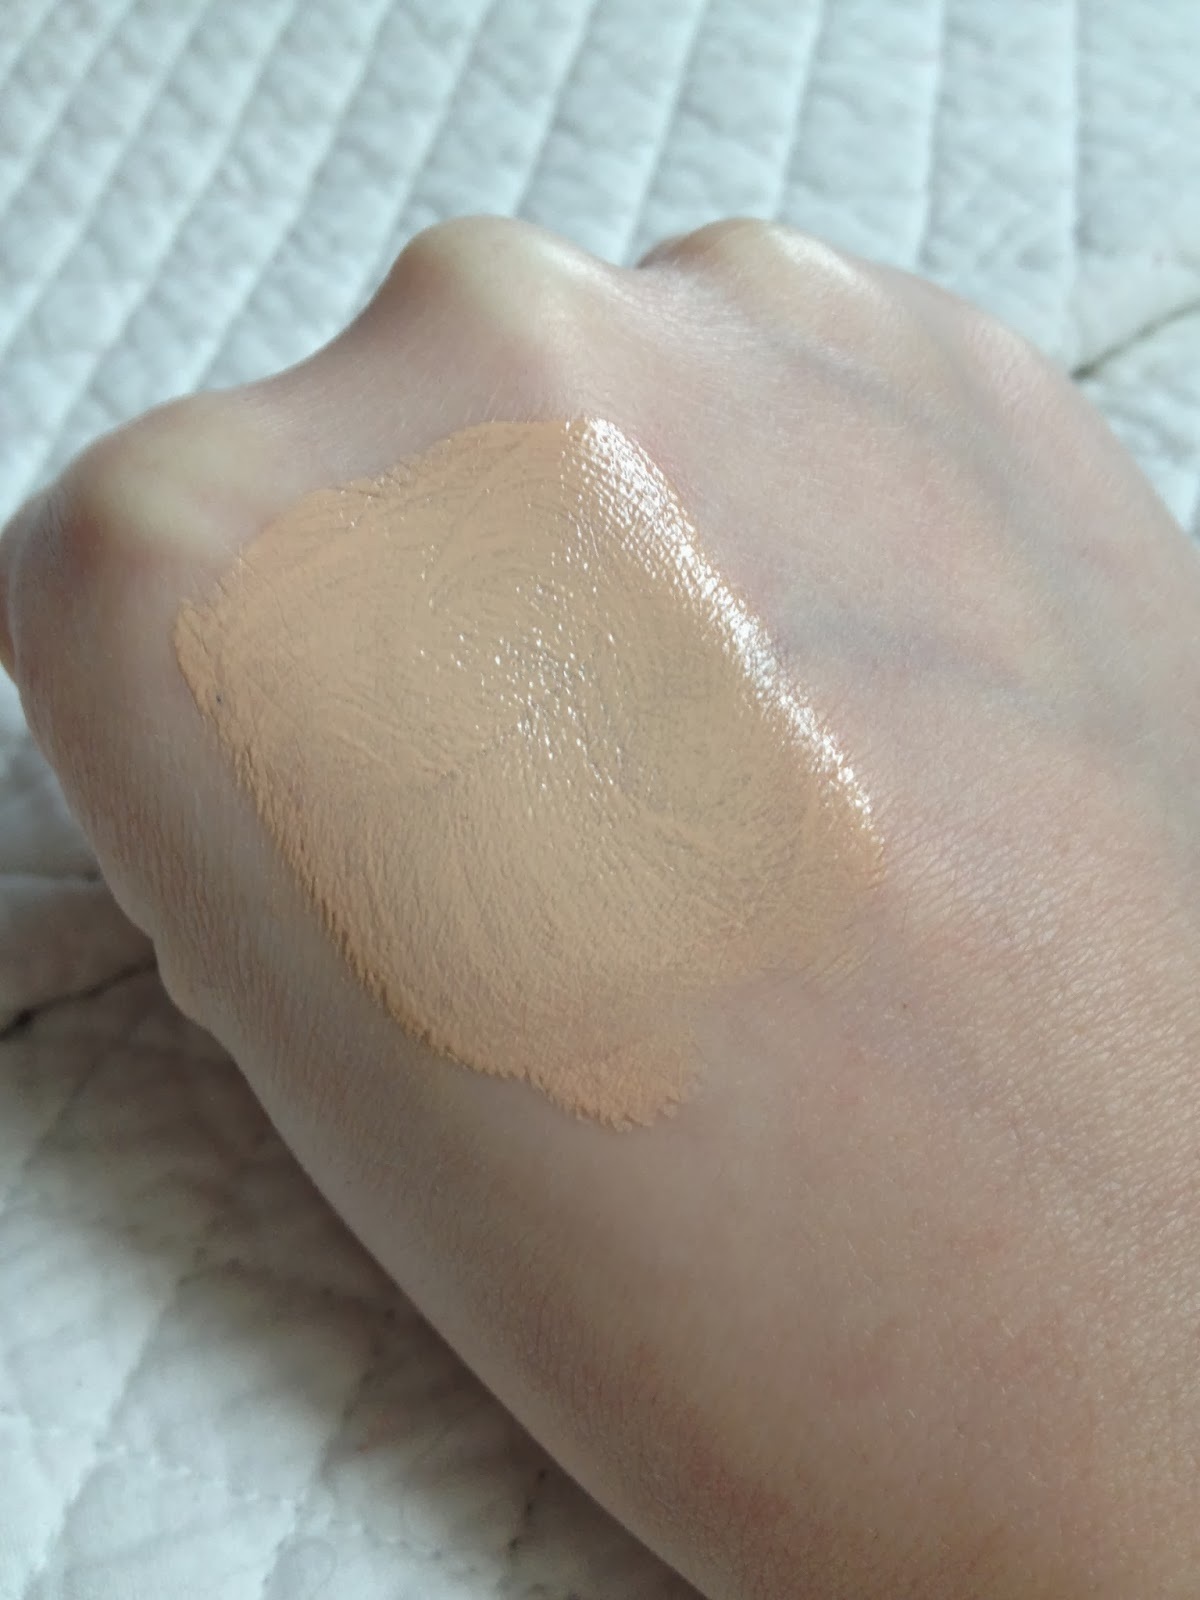 Dior Capture Totale Foundation Review!